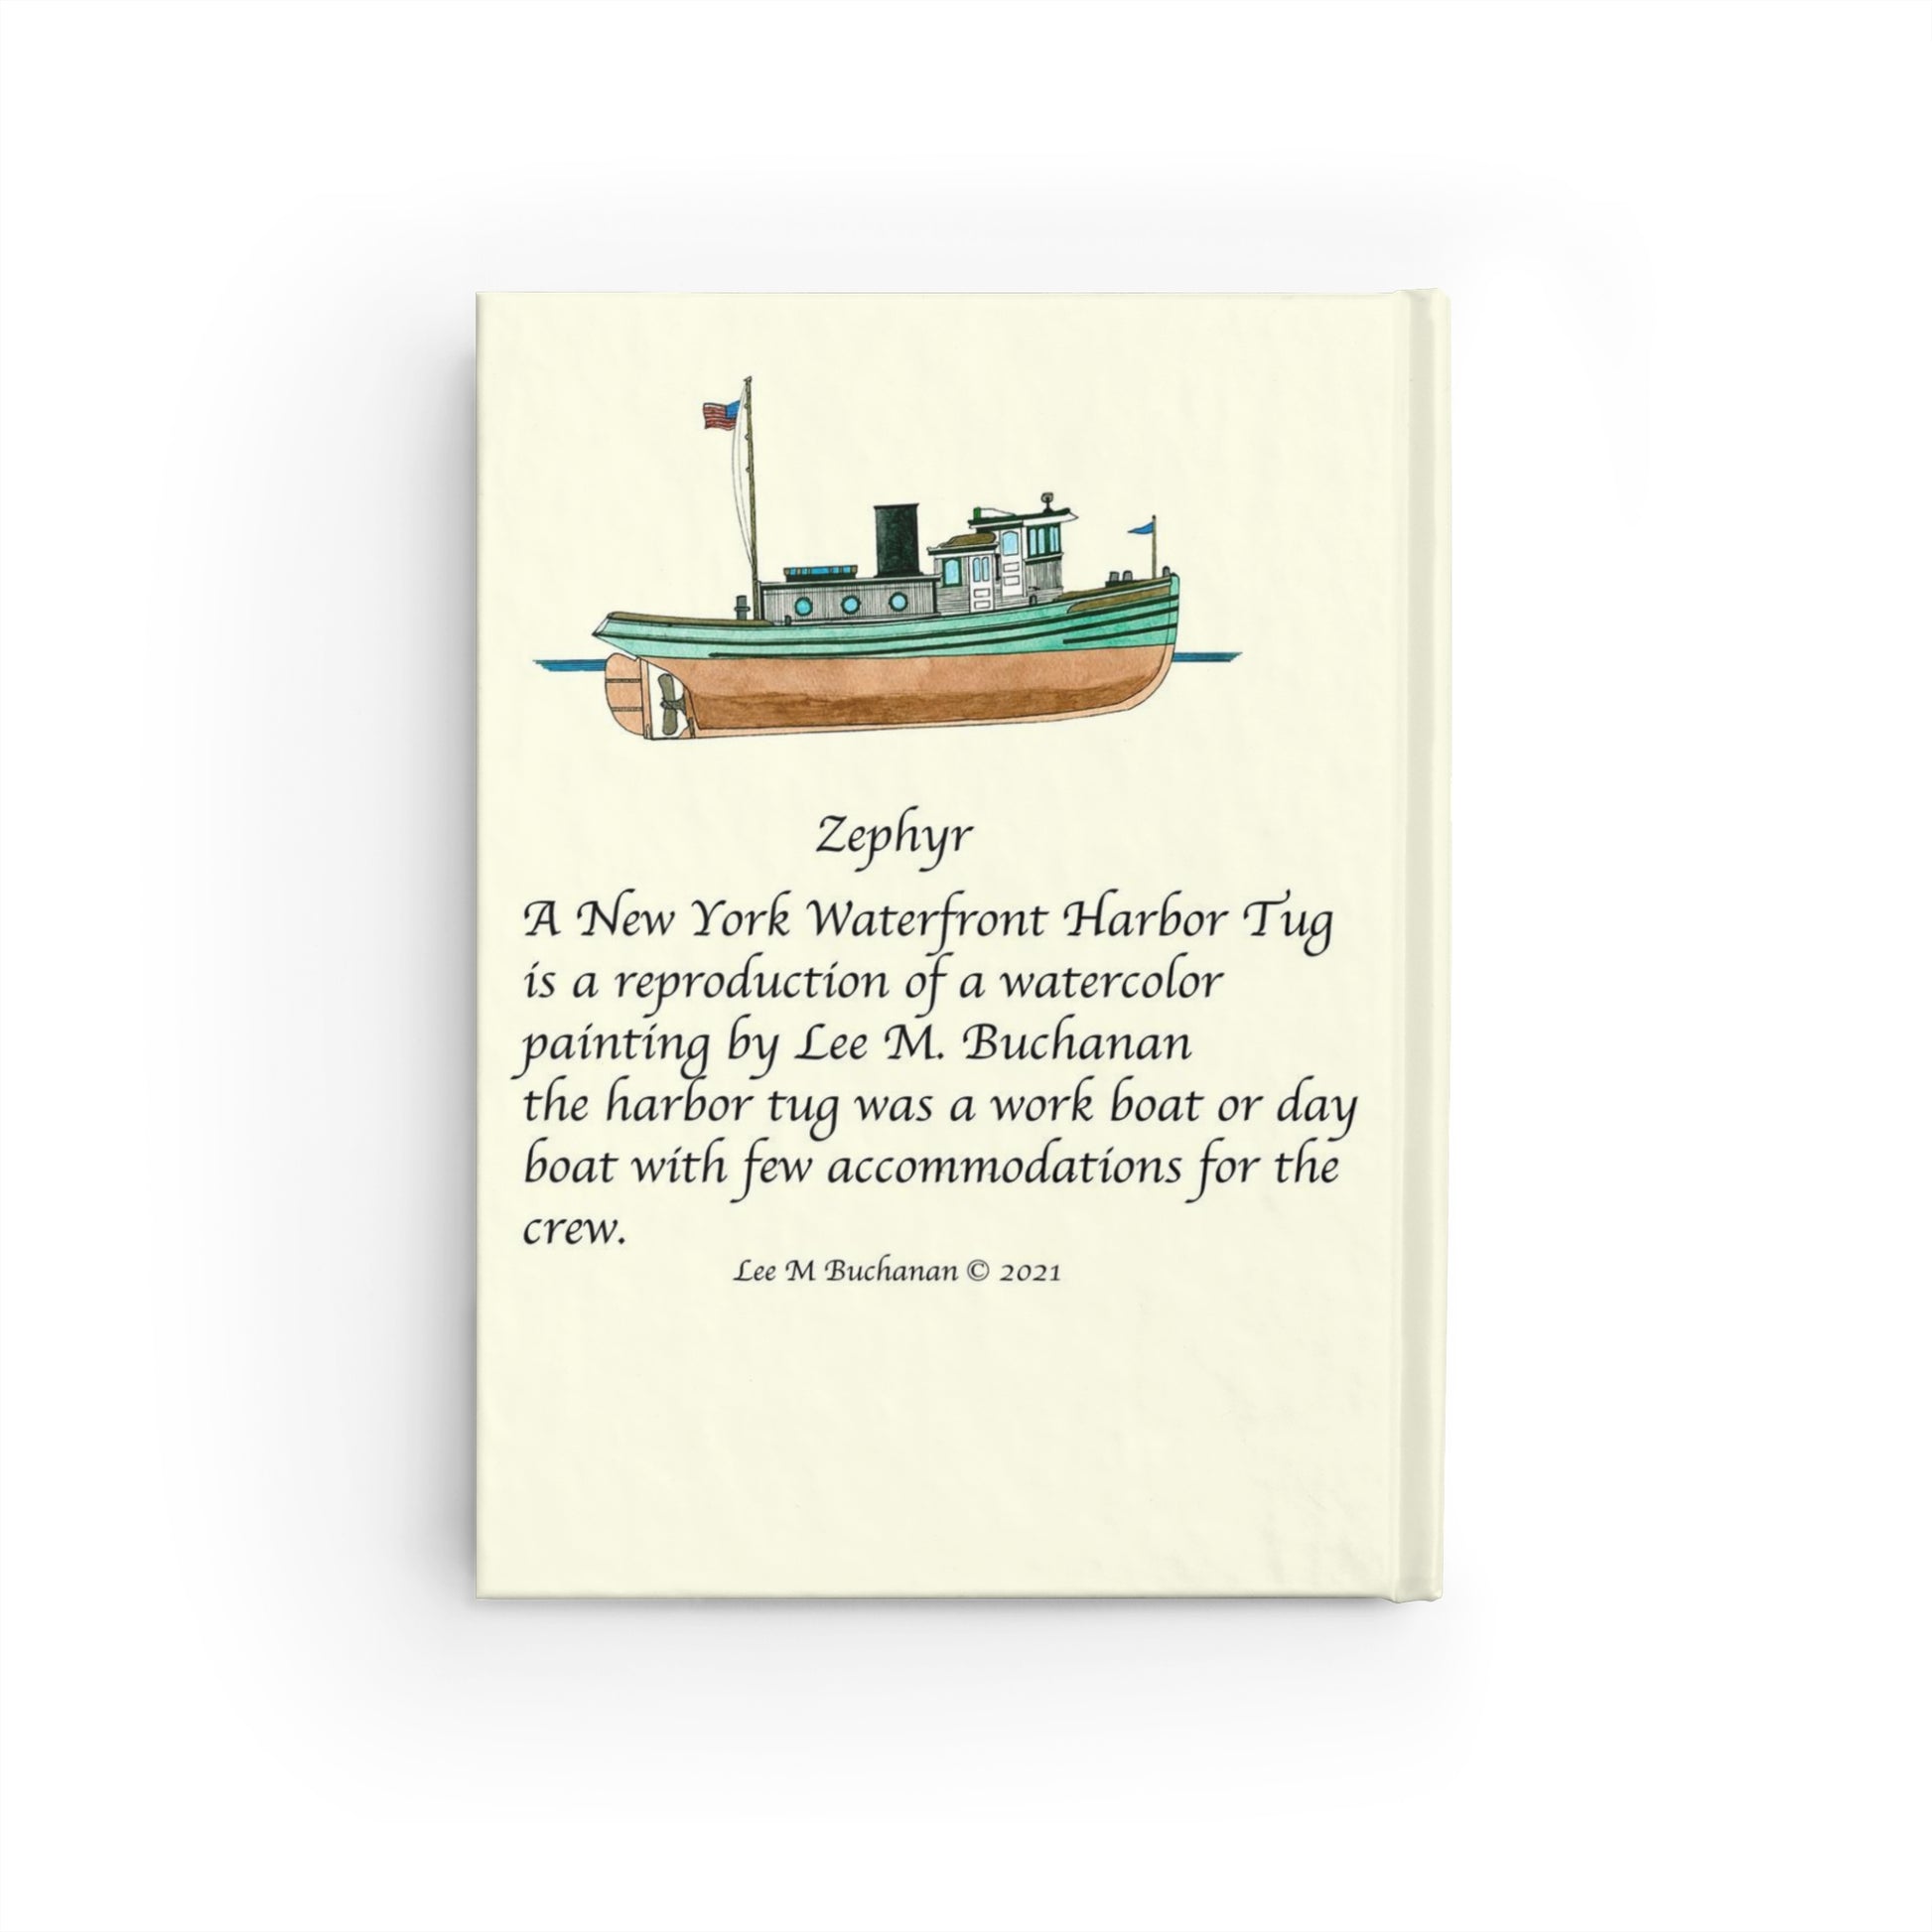 The Zephyr was a New York Waterfront Harbor Tug. The Journal design is a reproduction of an original watercolor by Lee M. Buchanan and has the image on the front and back of the book.   The Zephyr Ruled Line Journal will make a thoughtful gift for your friends and family who loves ships and boats and and nautical gifts.